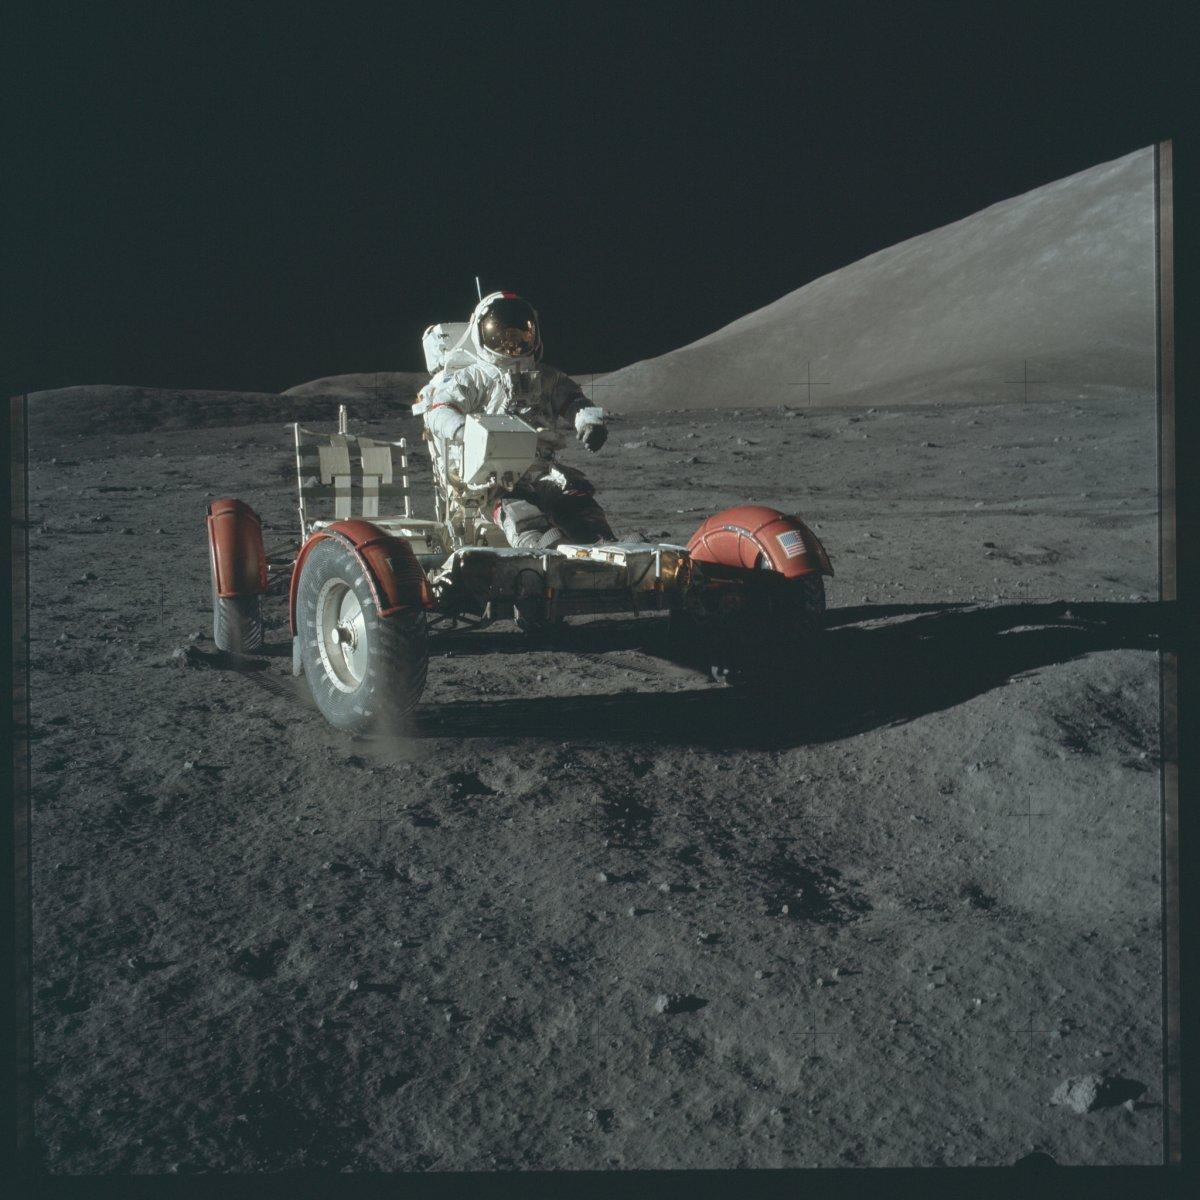 Incredible High Res Photo Of The Apollo Missions Have Just Been